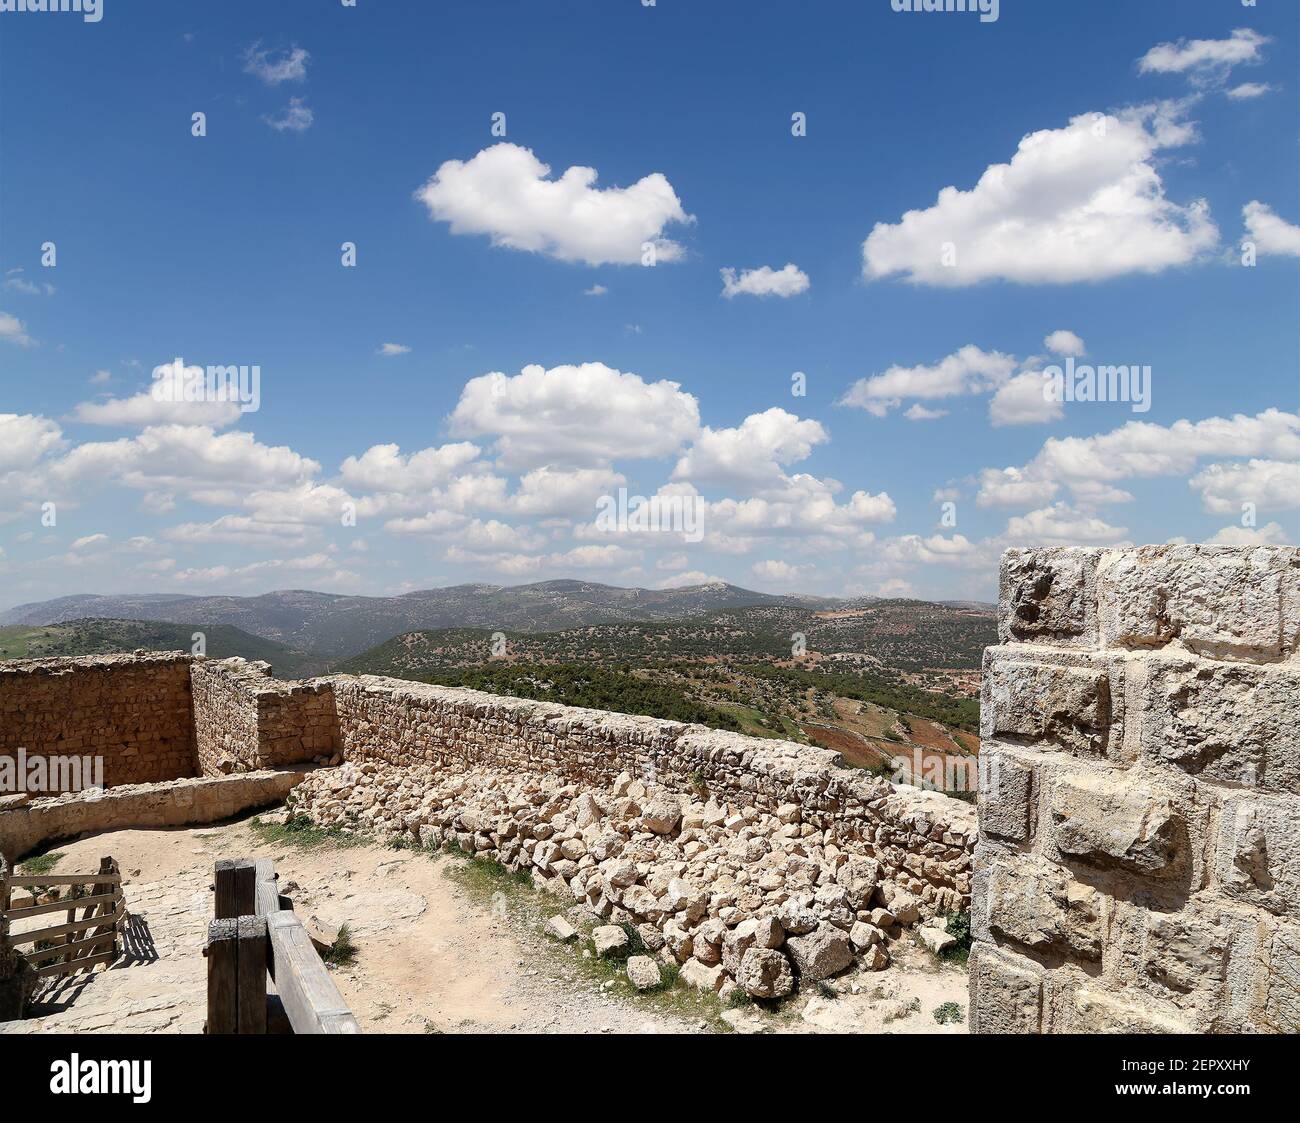 The ayyubid castle of Ajloun in northern Jordan, built in the 12th century, Middle East Stock Photo